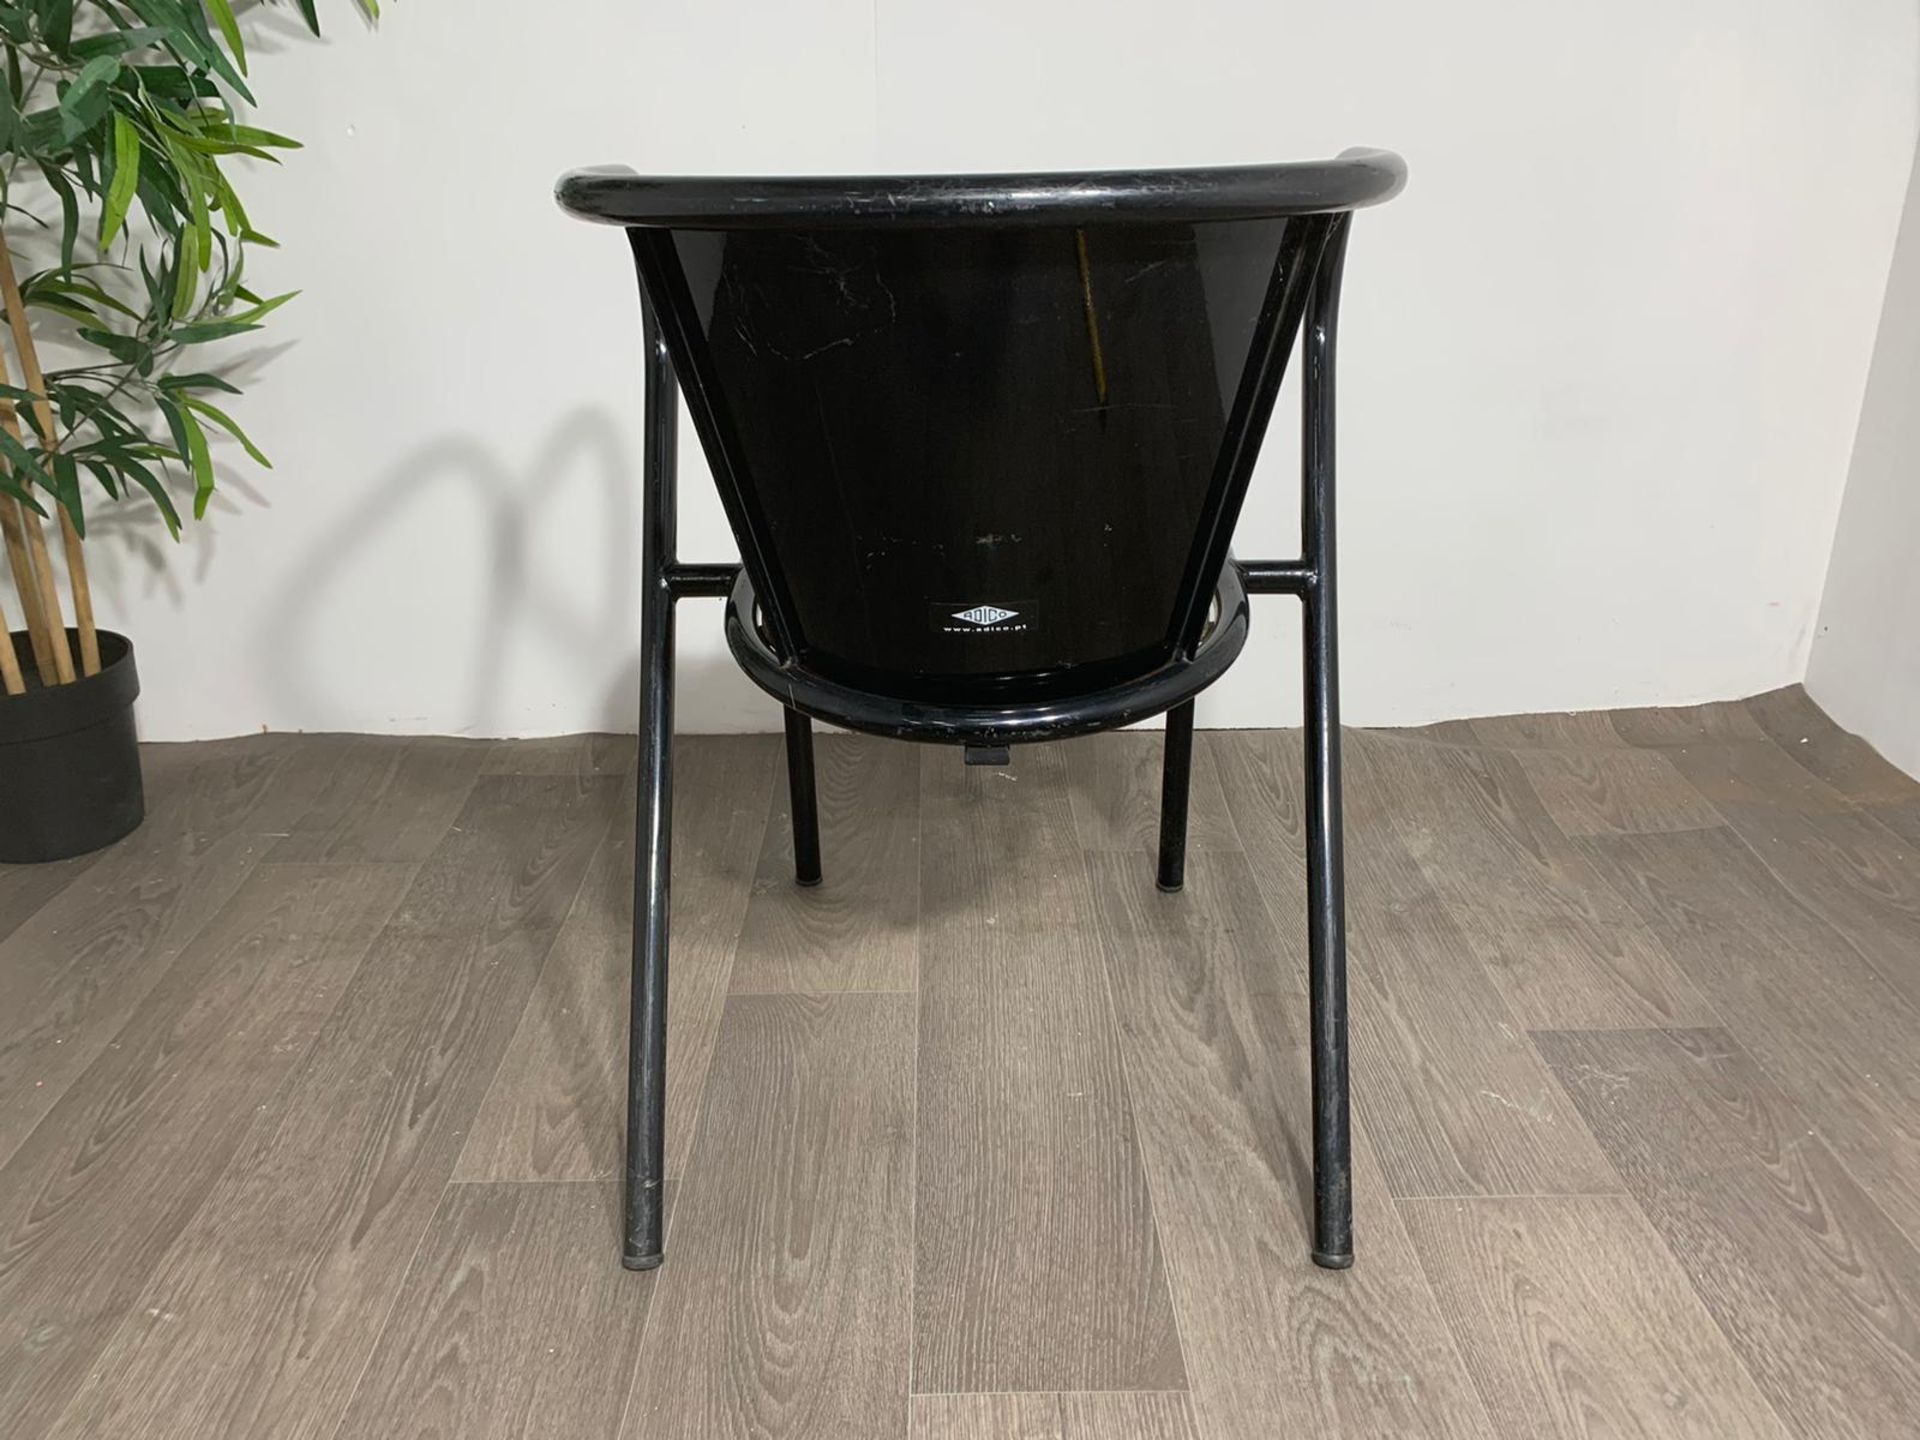 Adico 5008 Black Chair With Wooden Seat - Image 4 of 10